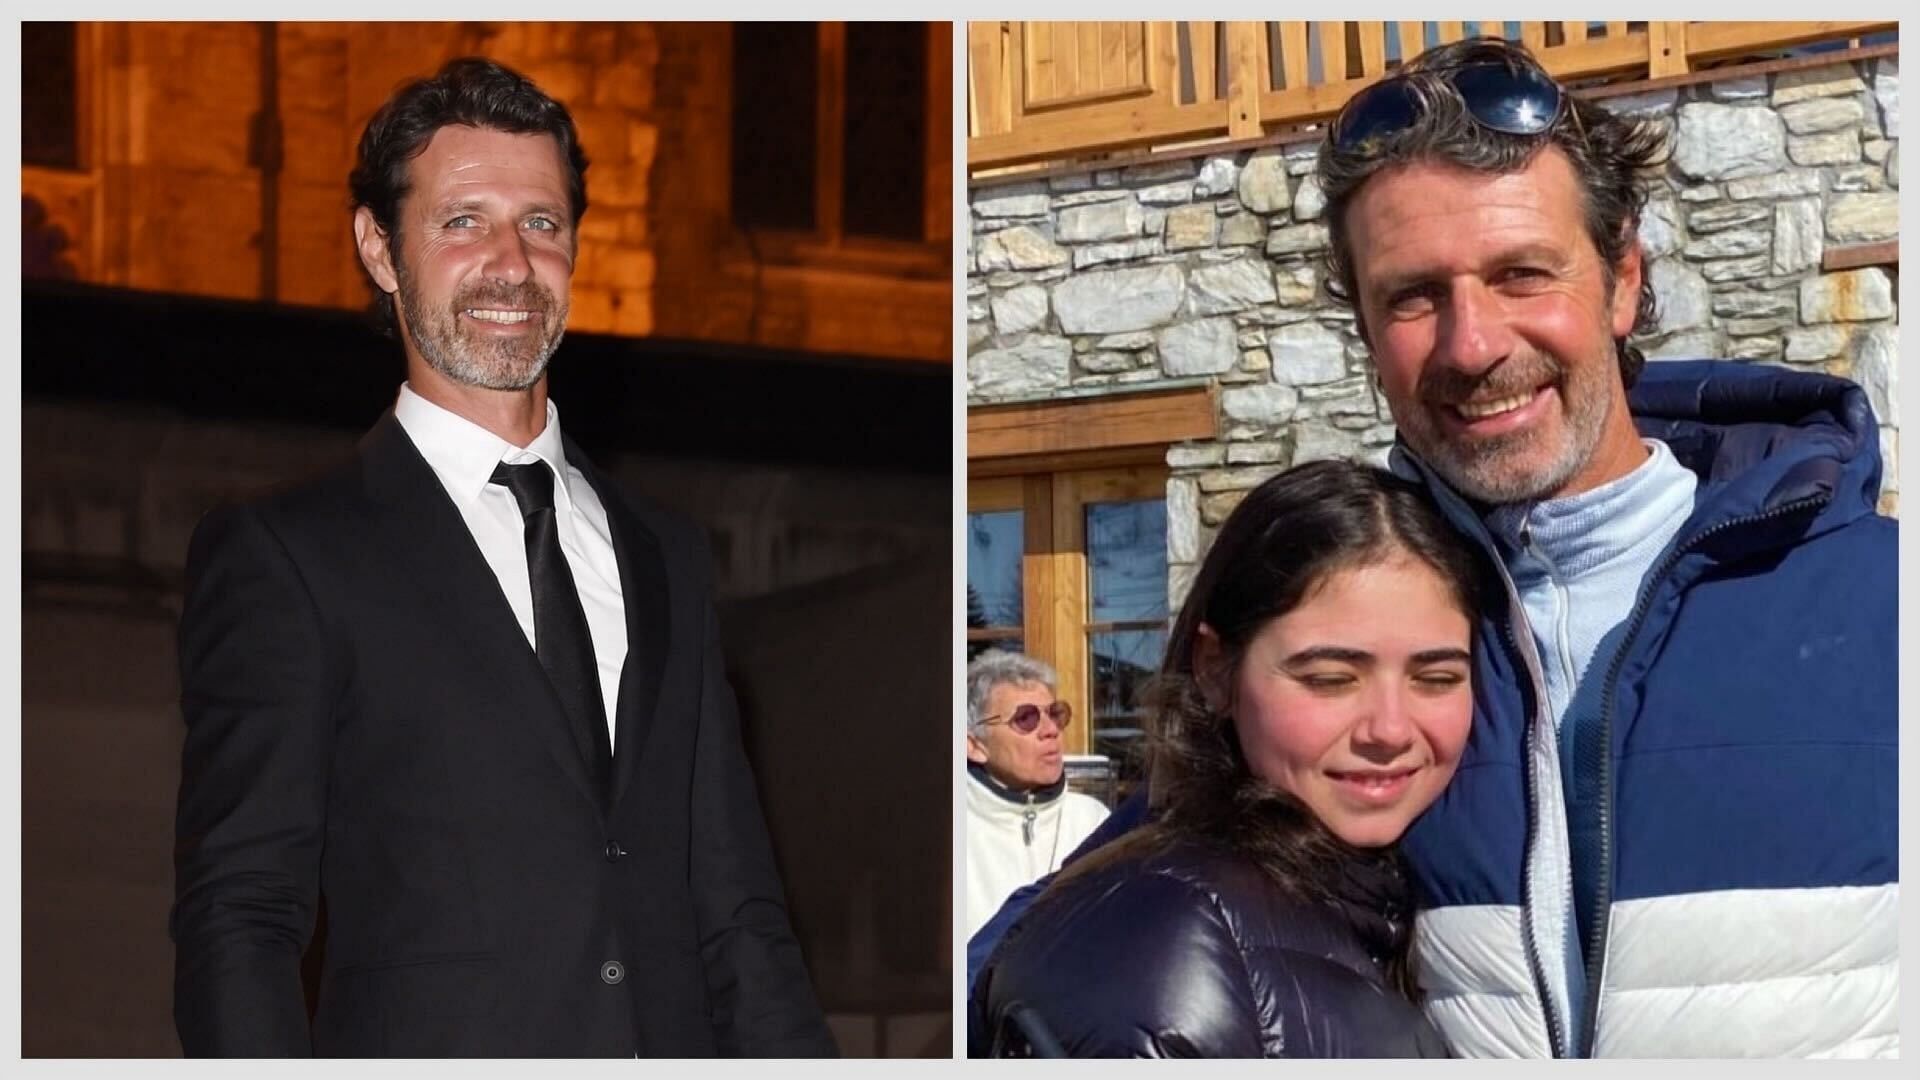 Proud dad - Serena Williams' former coach Patrick Mouratoglou delighted to  see daughter Juliette modelling for Vogue